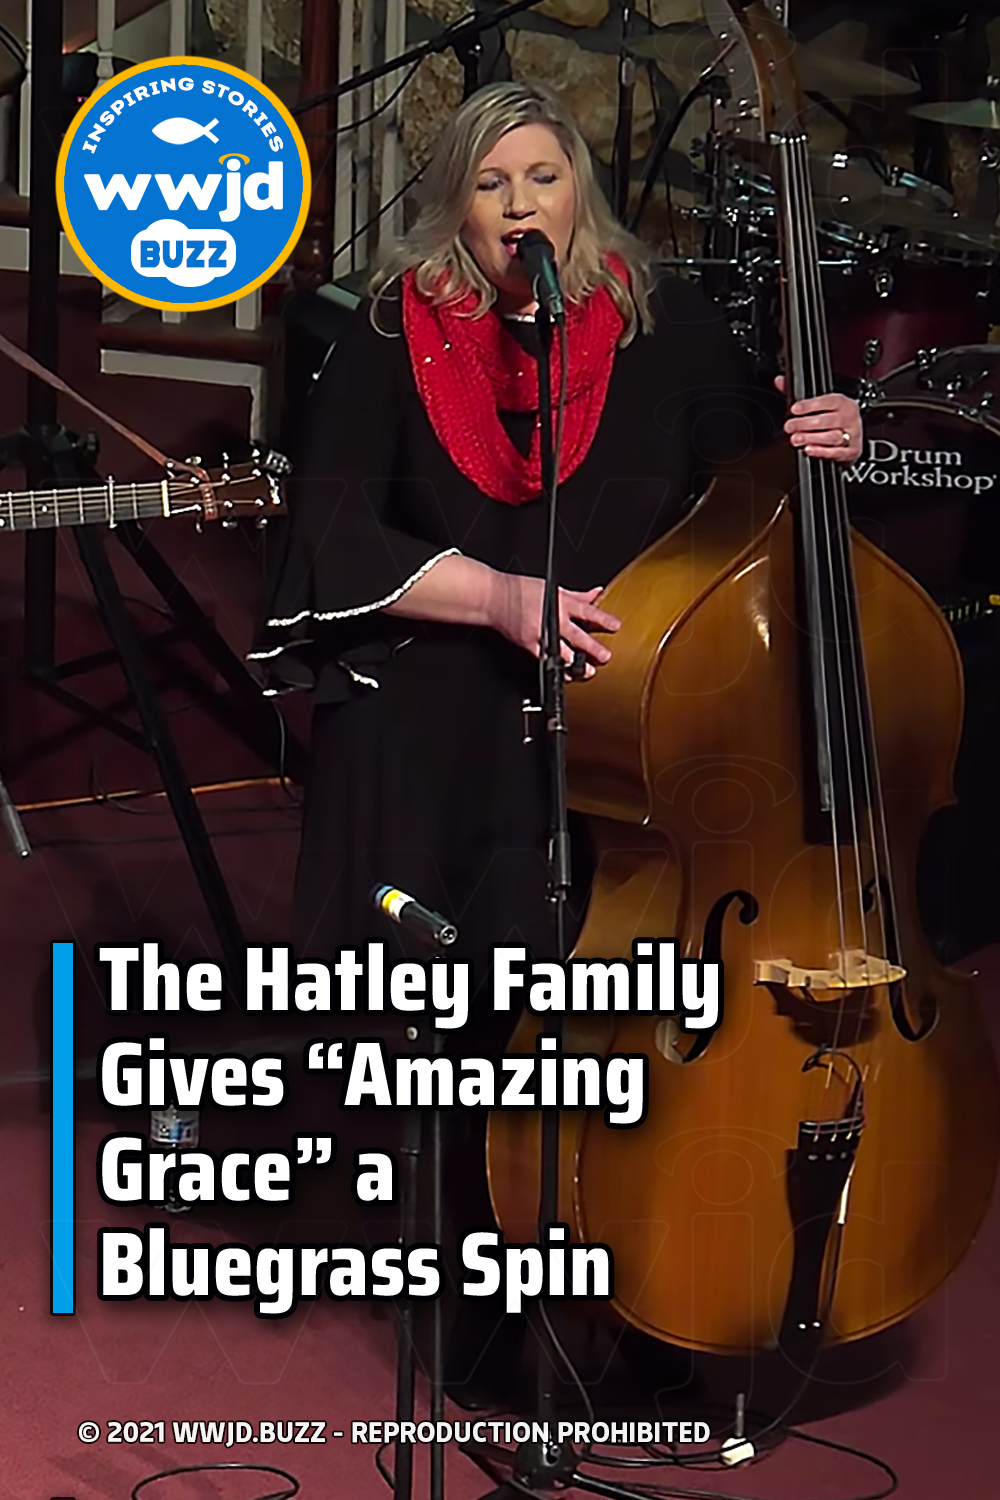 The Hatley Family Gives “Amazing Grace” a Bluegrass Spin